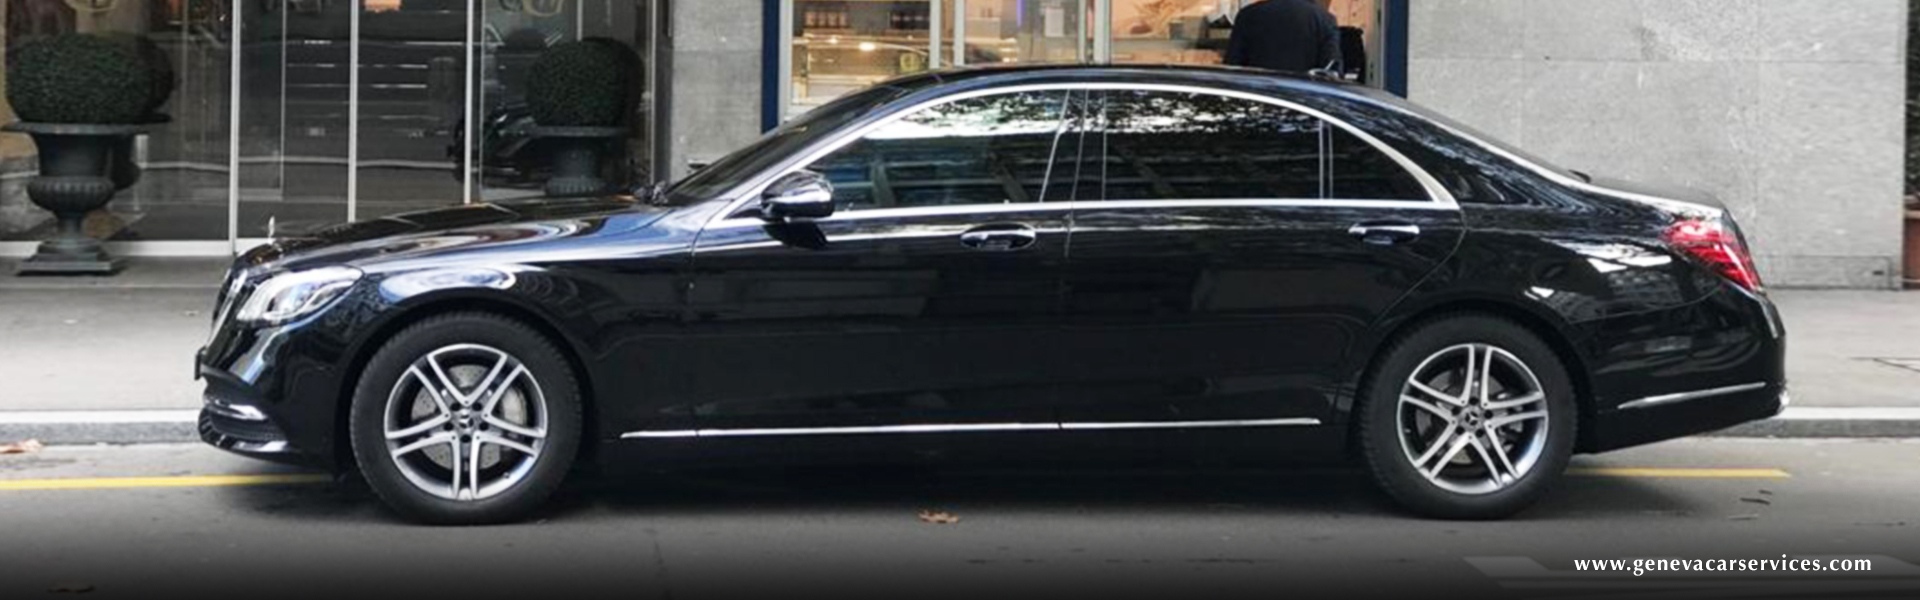 Book all-time favourite Limo Services in Geneva!